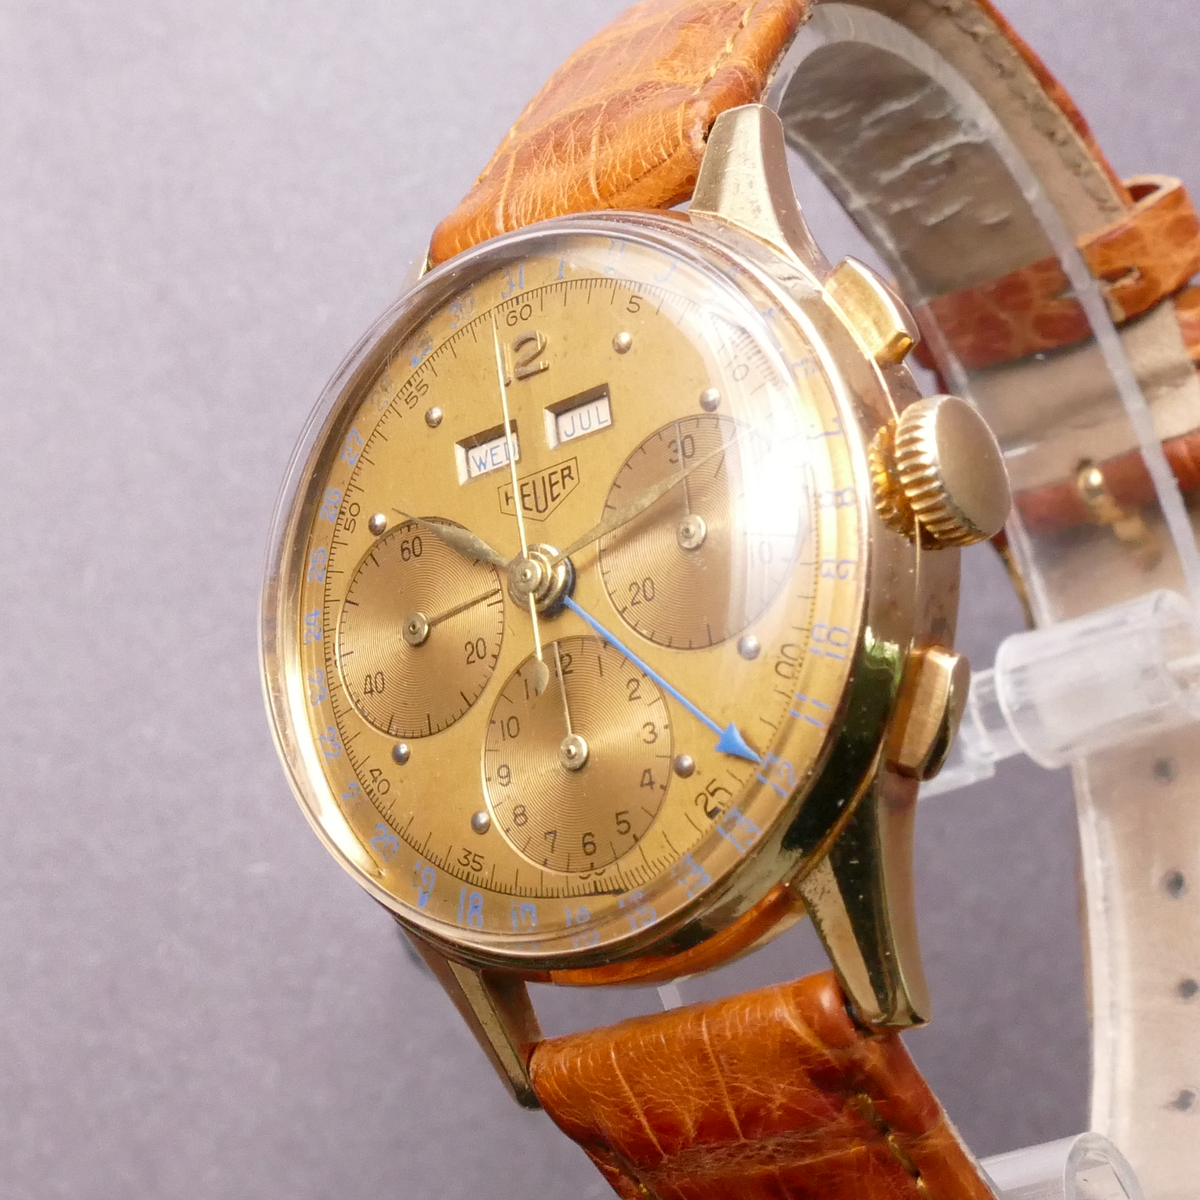 Tag Heuer Vintage Heuer Chronograph With Valjoux 72 Movement